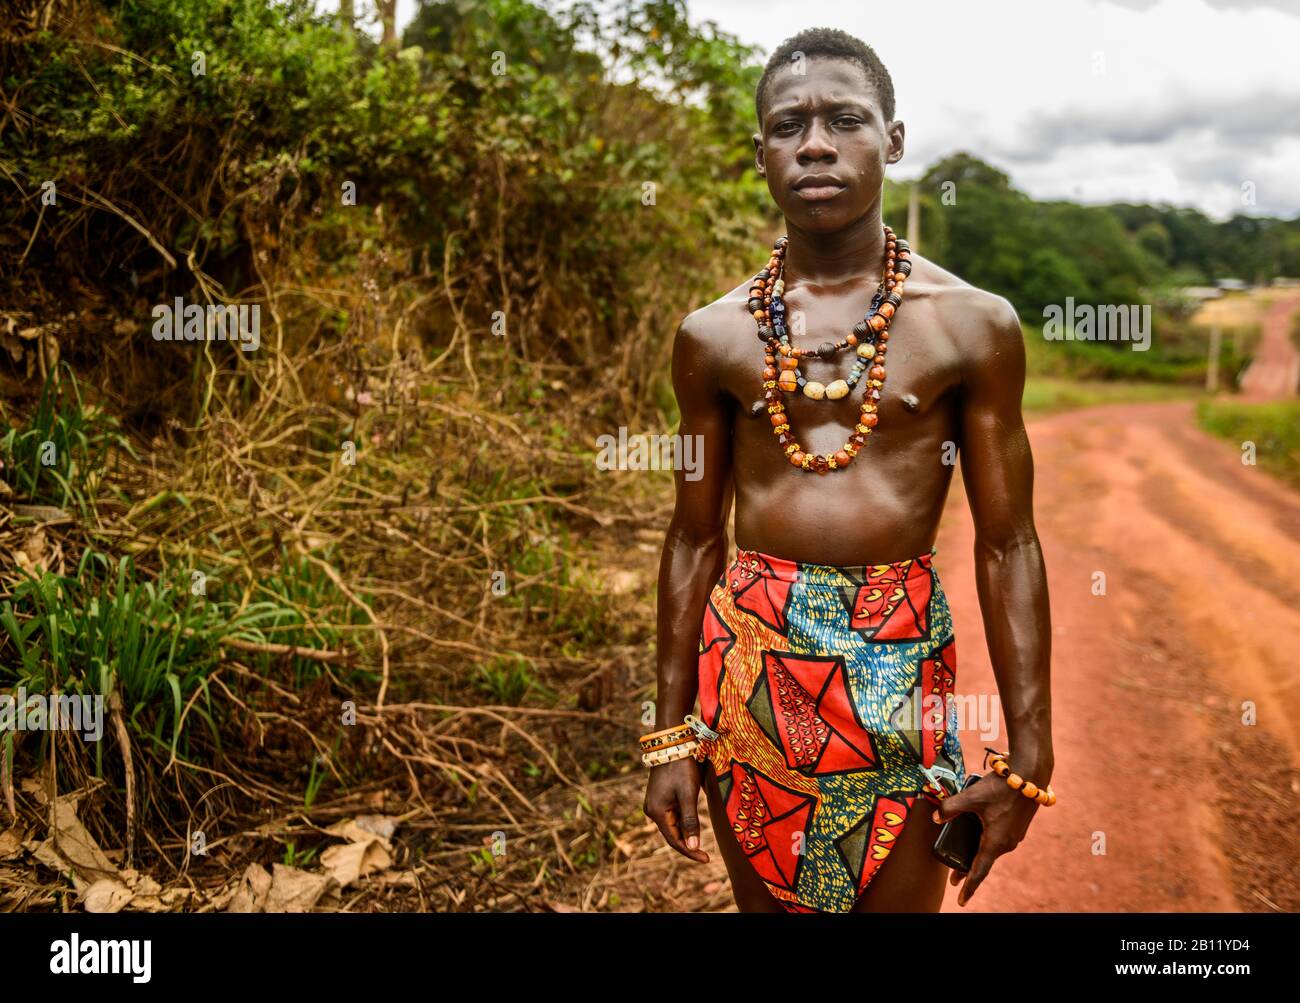 Adolescent a month before circumcision, Gabon, Central Africa Stock Photo